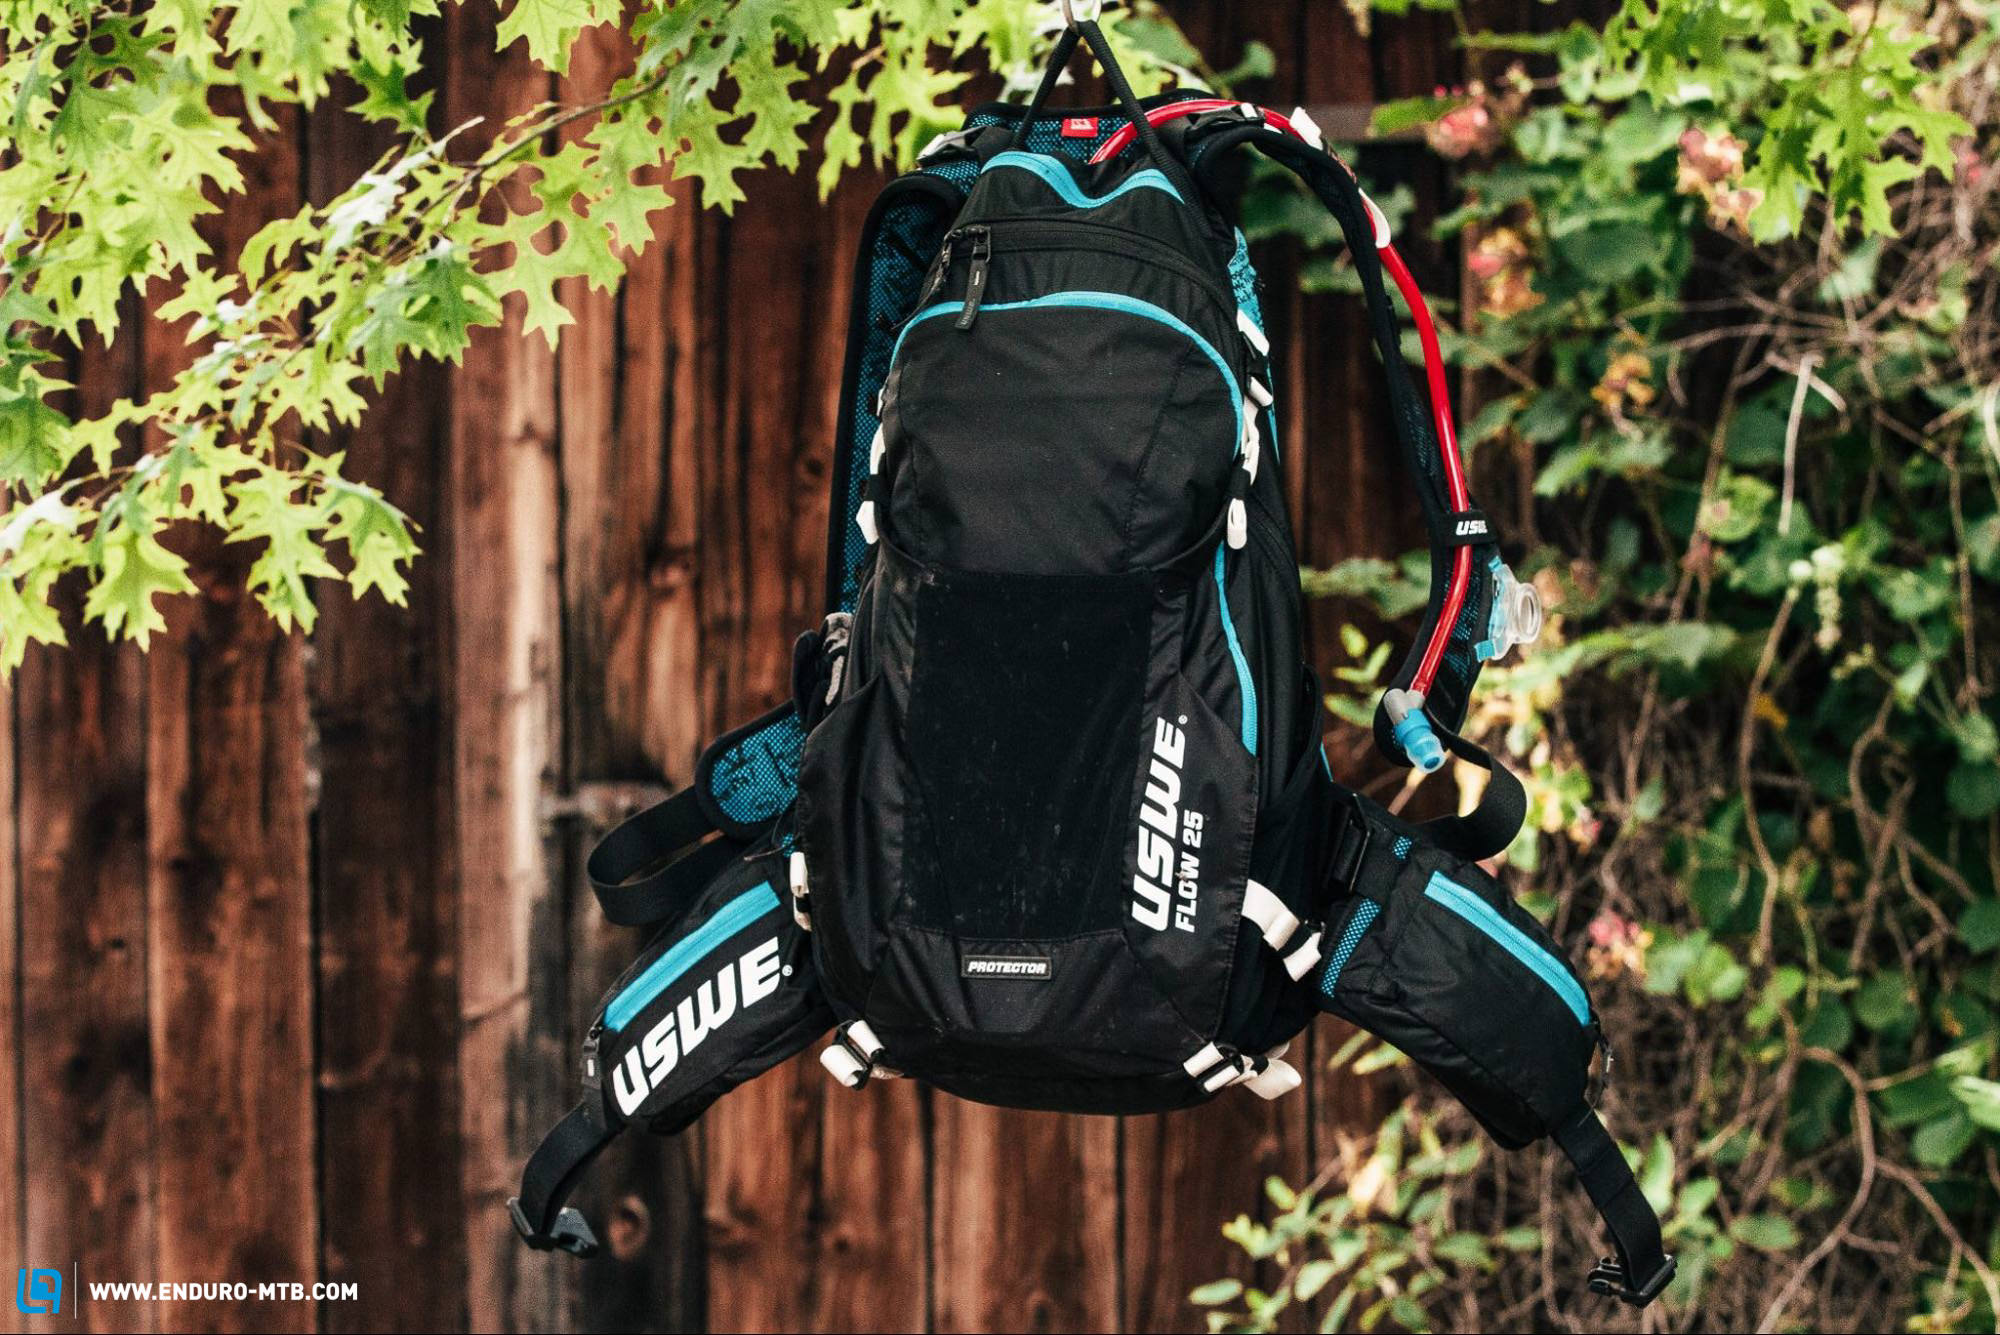 USWE Flow 25 Protector in review – High-end protector backpack with a perfect fit?